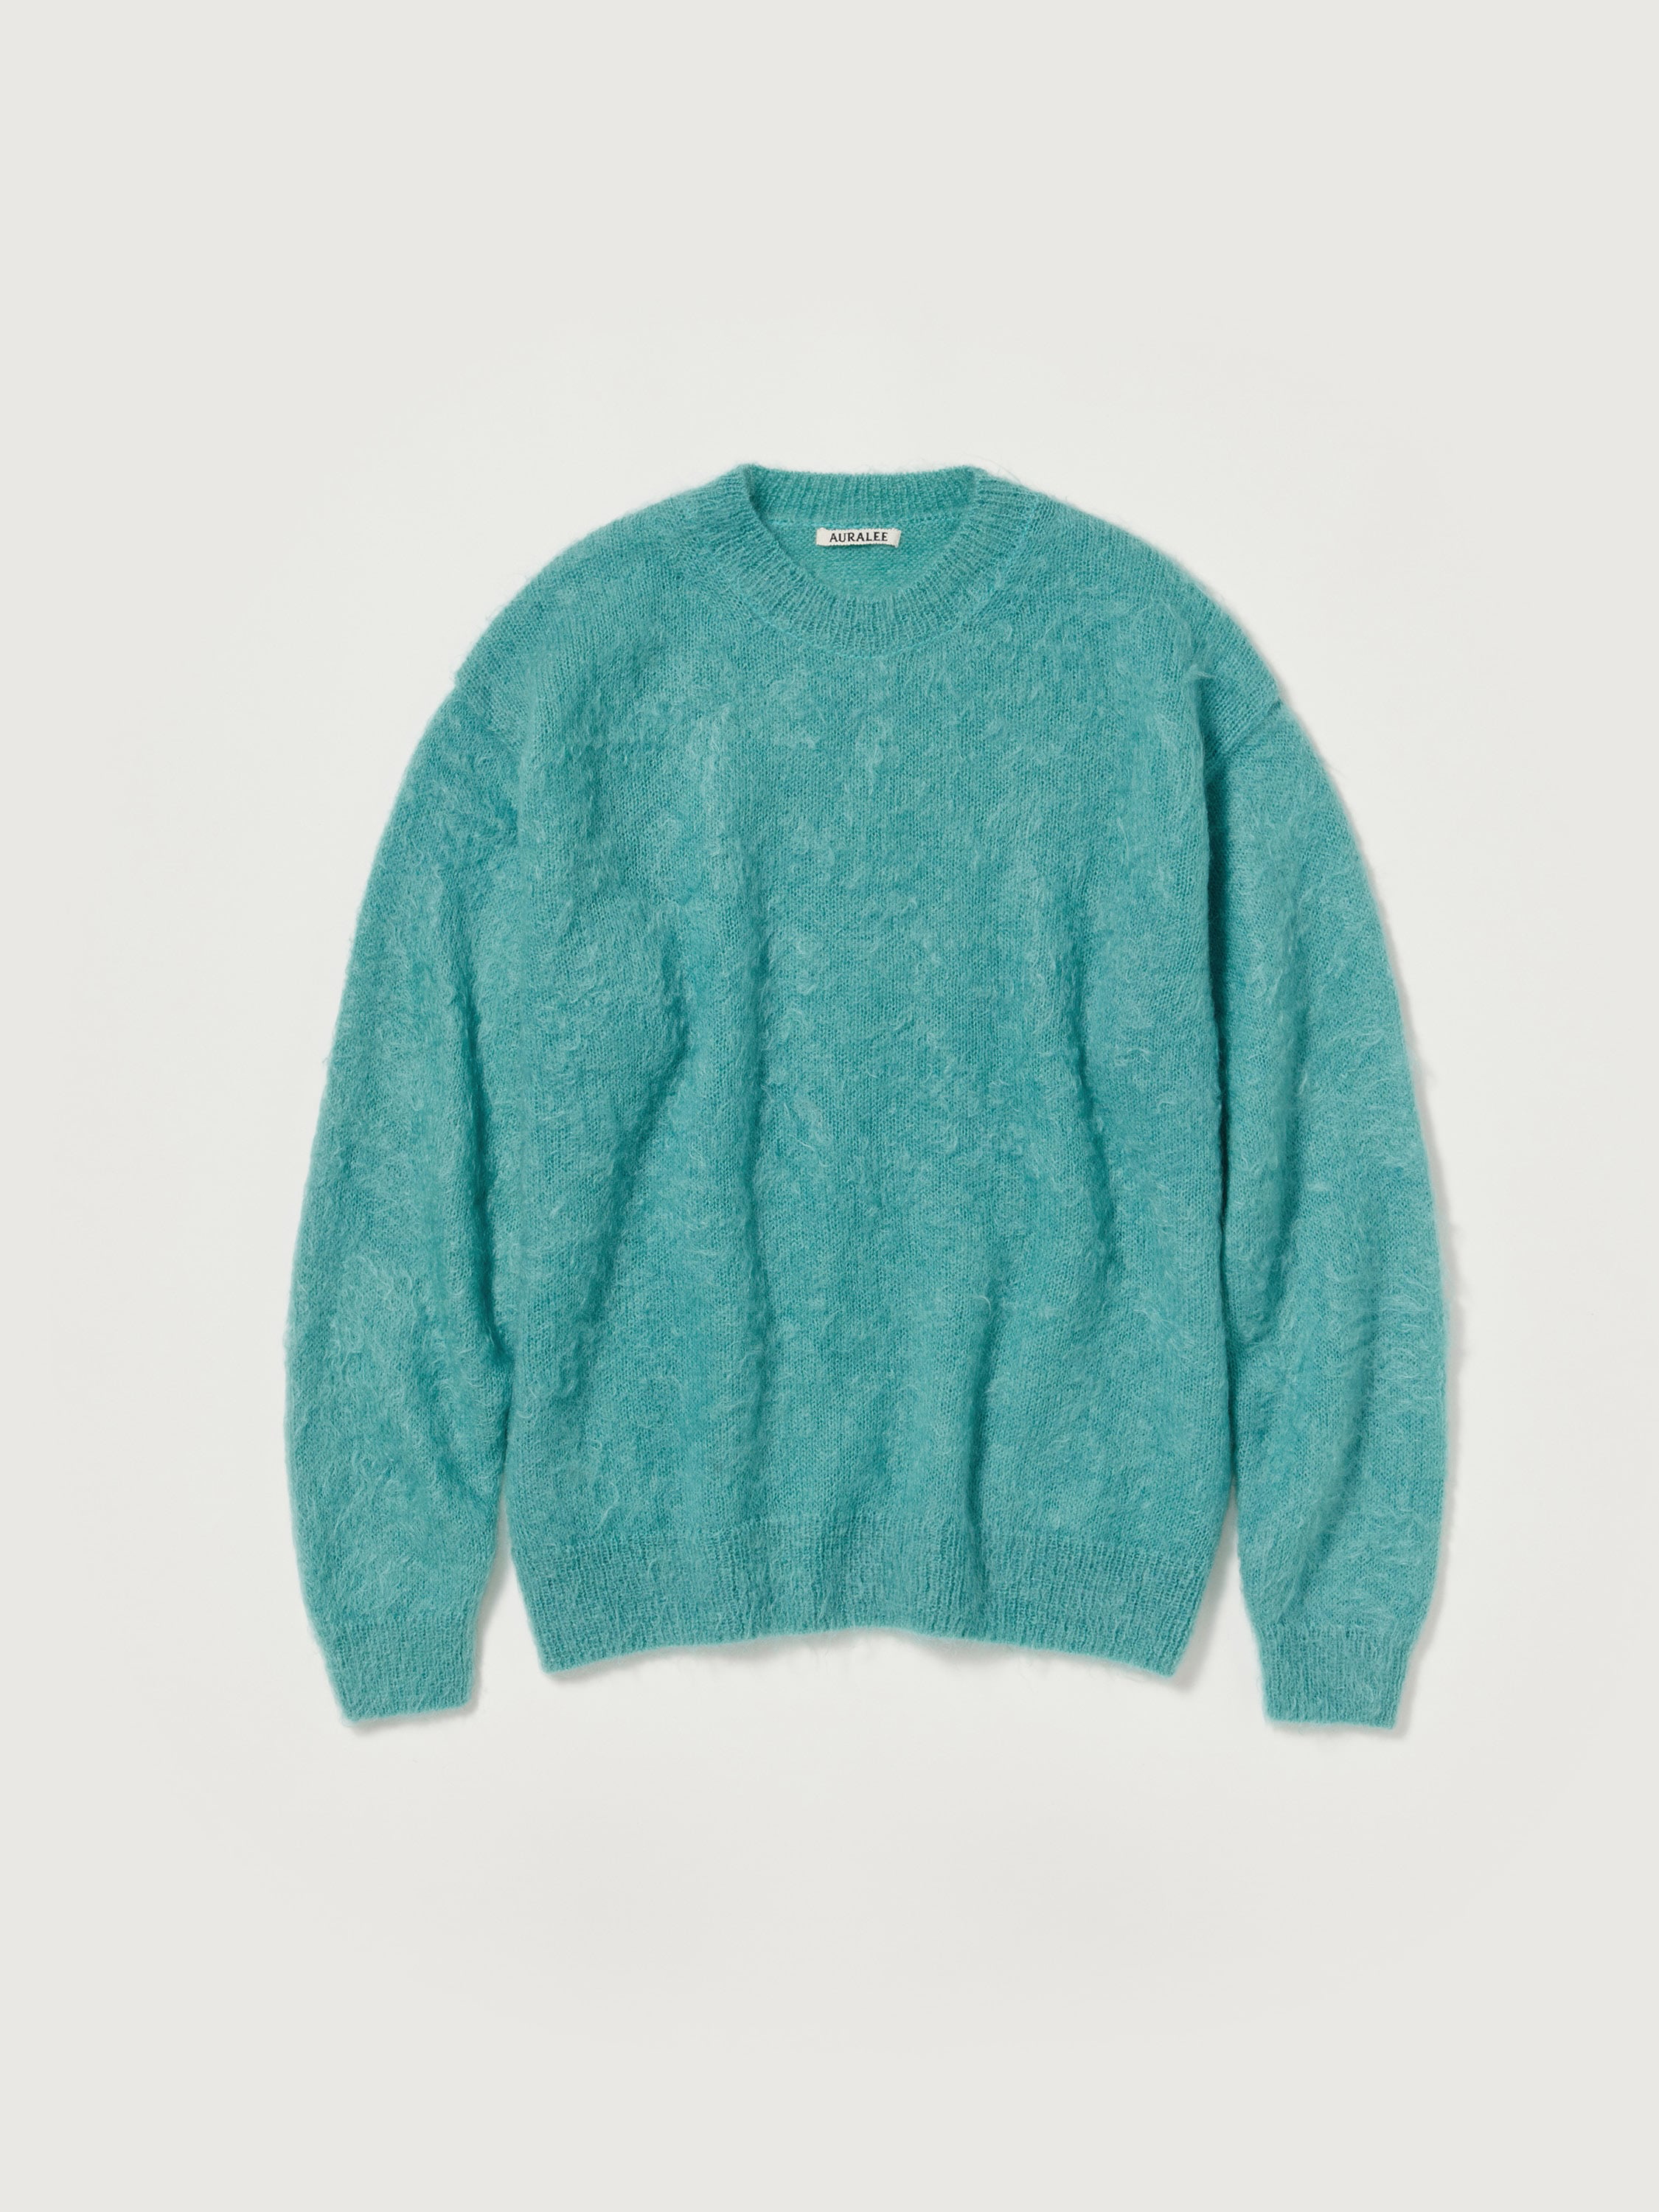 BRUSHED SUPER KID MOHAIR KNIT P/O 詳細画像 BLUE 6